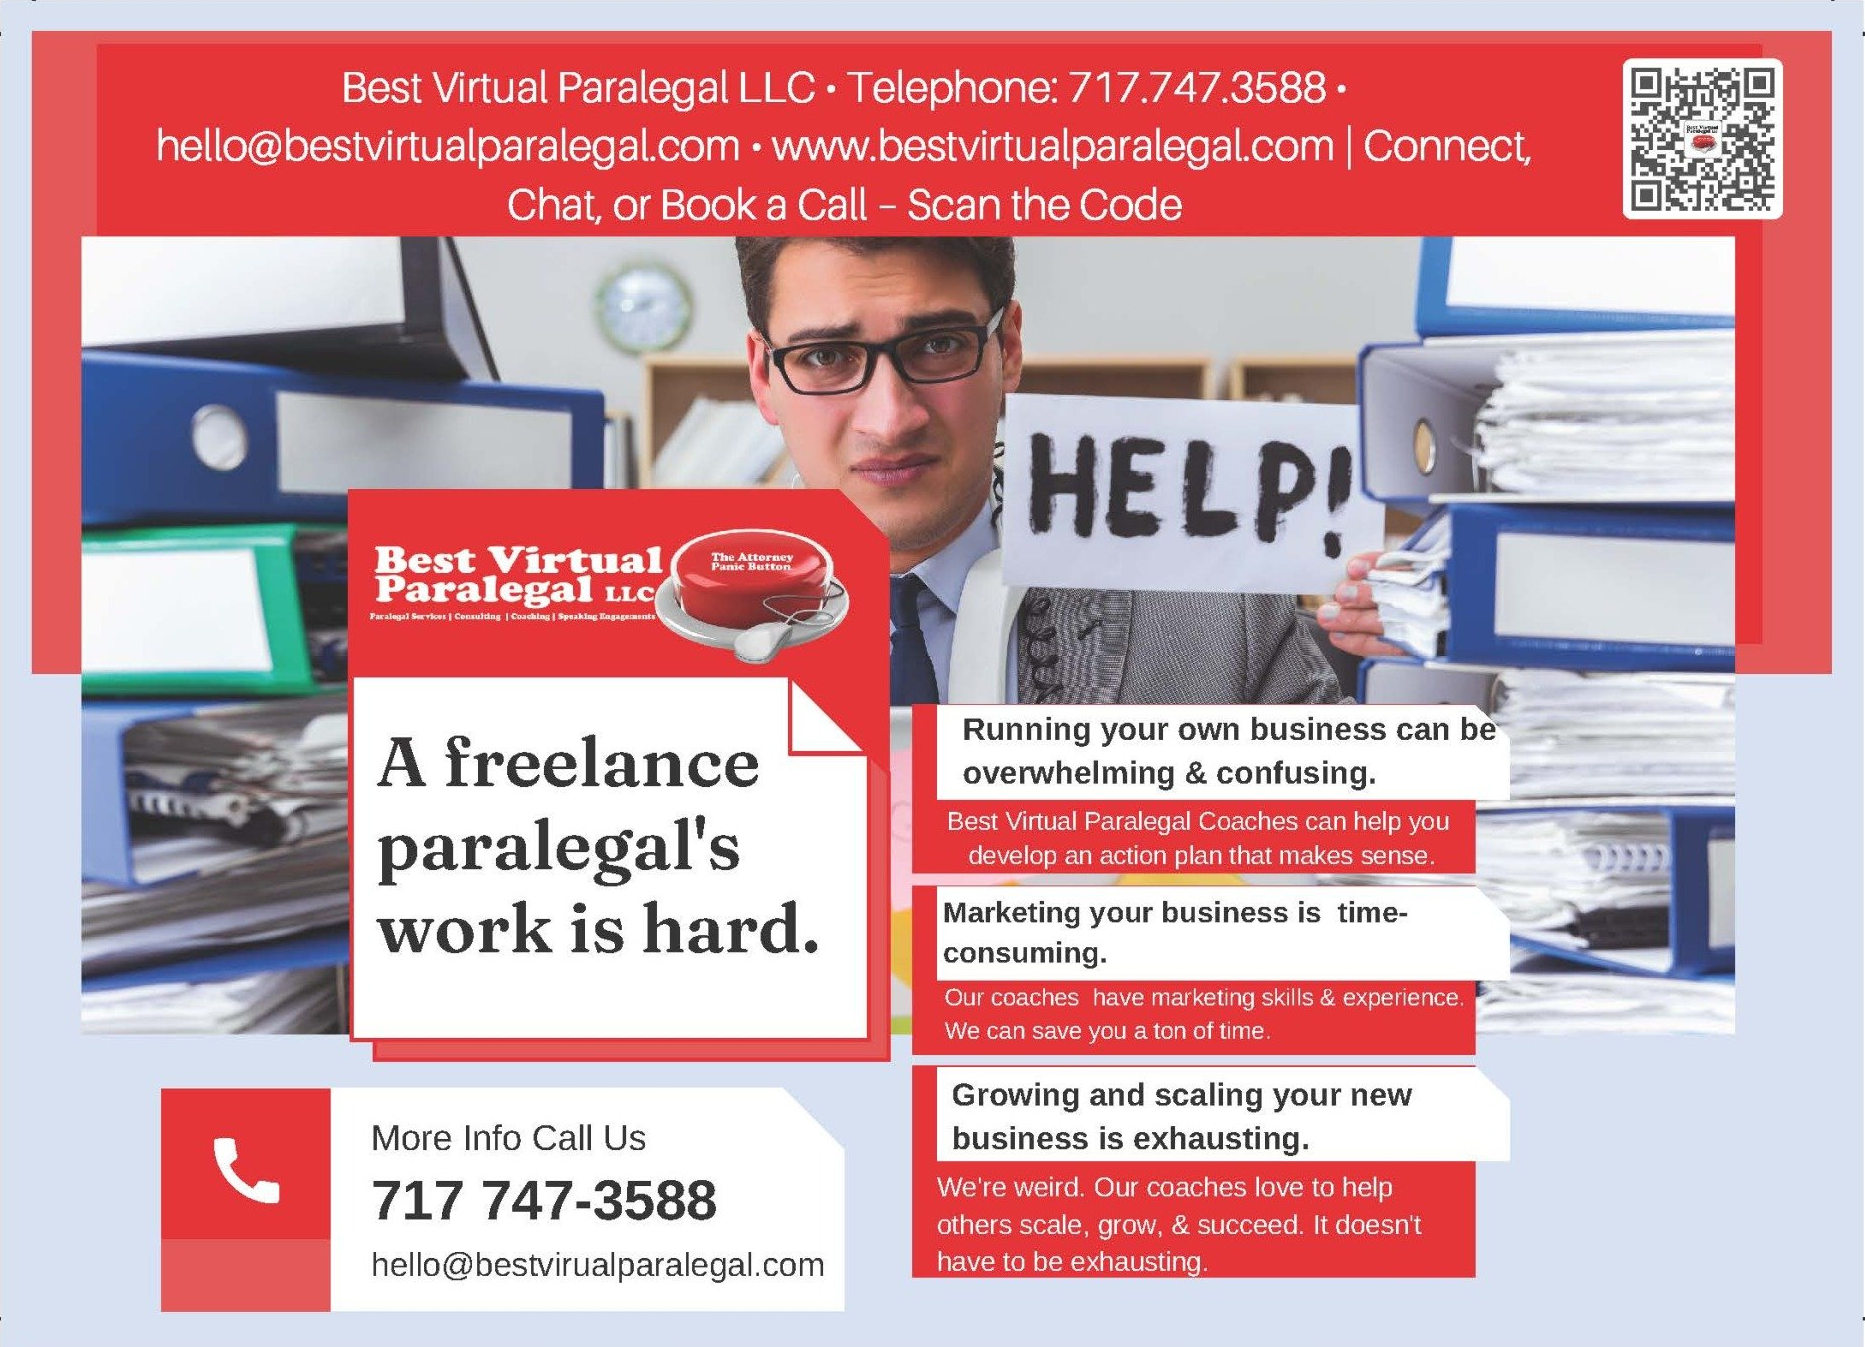 Paralegal-services